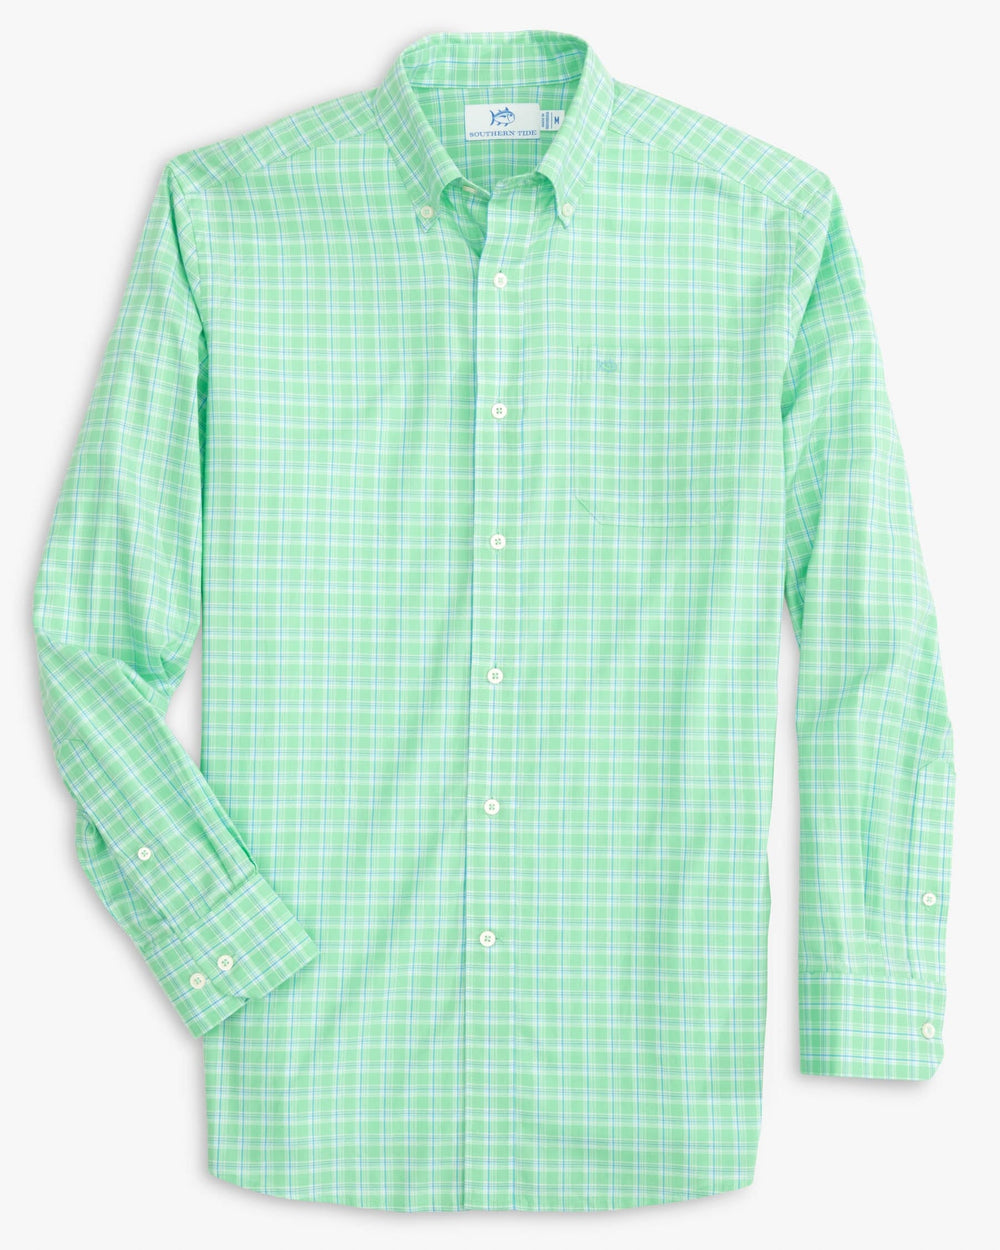 The front view of the Skipjack Winton Plaid Sport Shirt by Southern Tide - Neptune Green